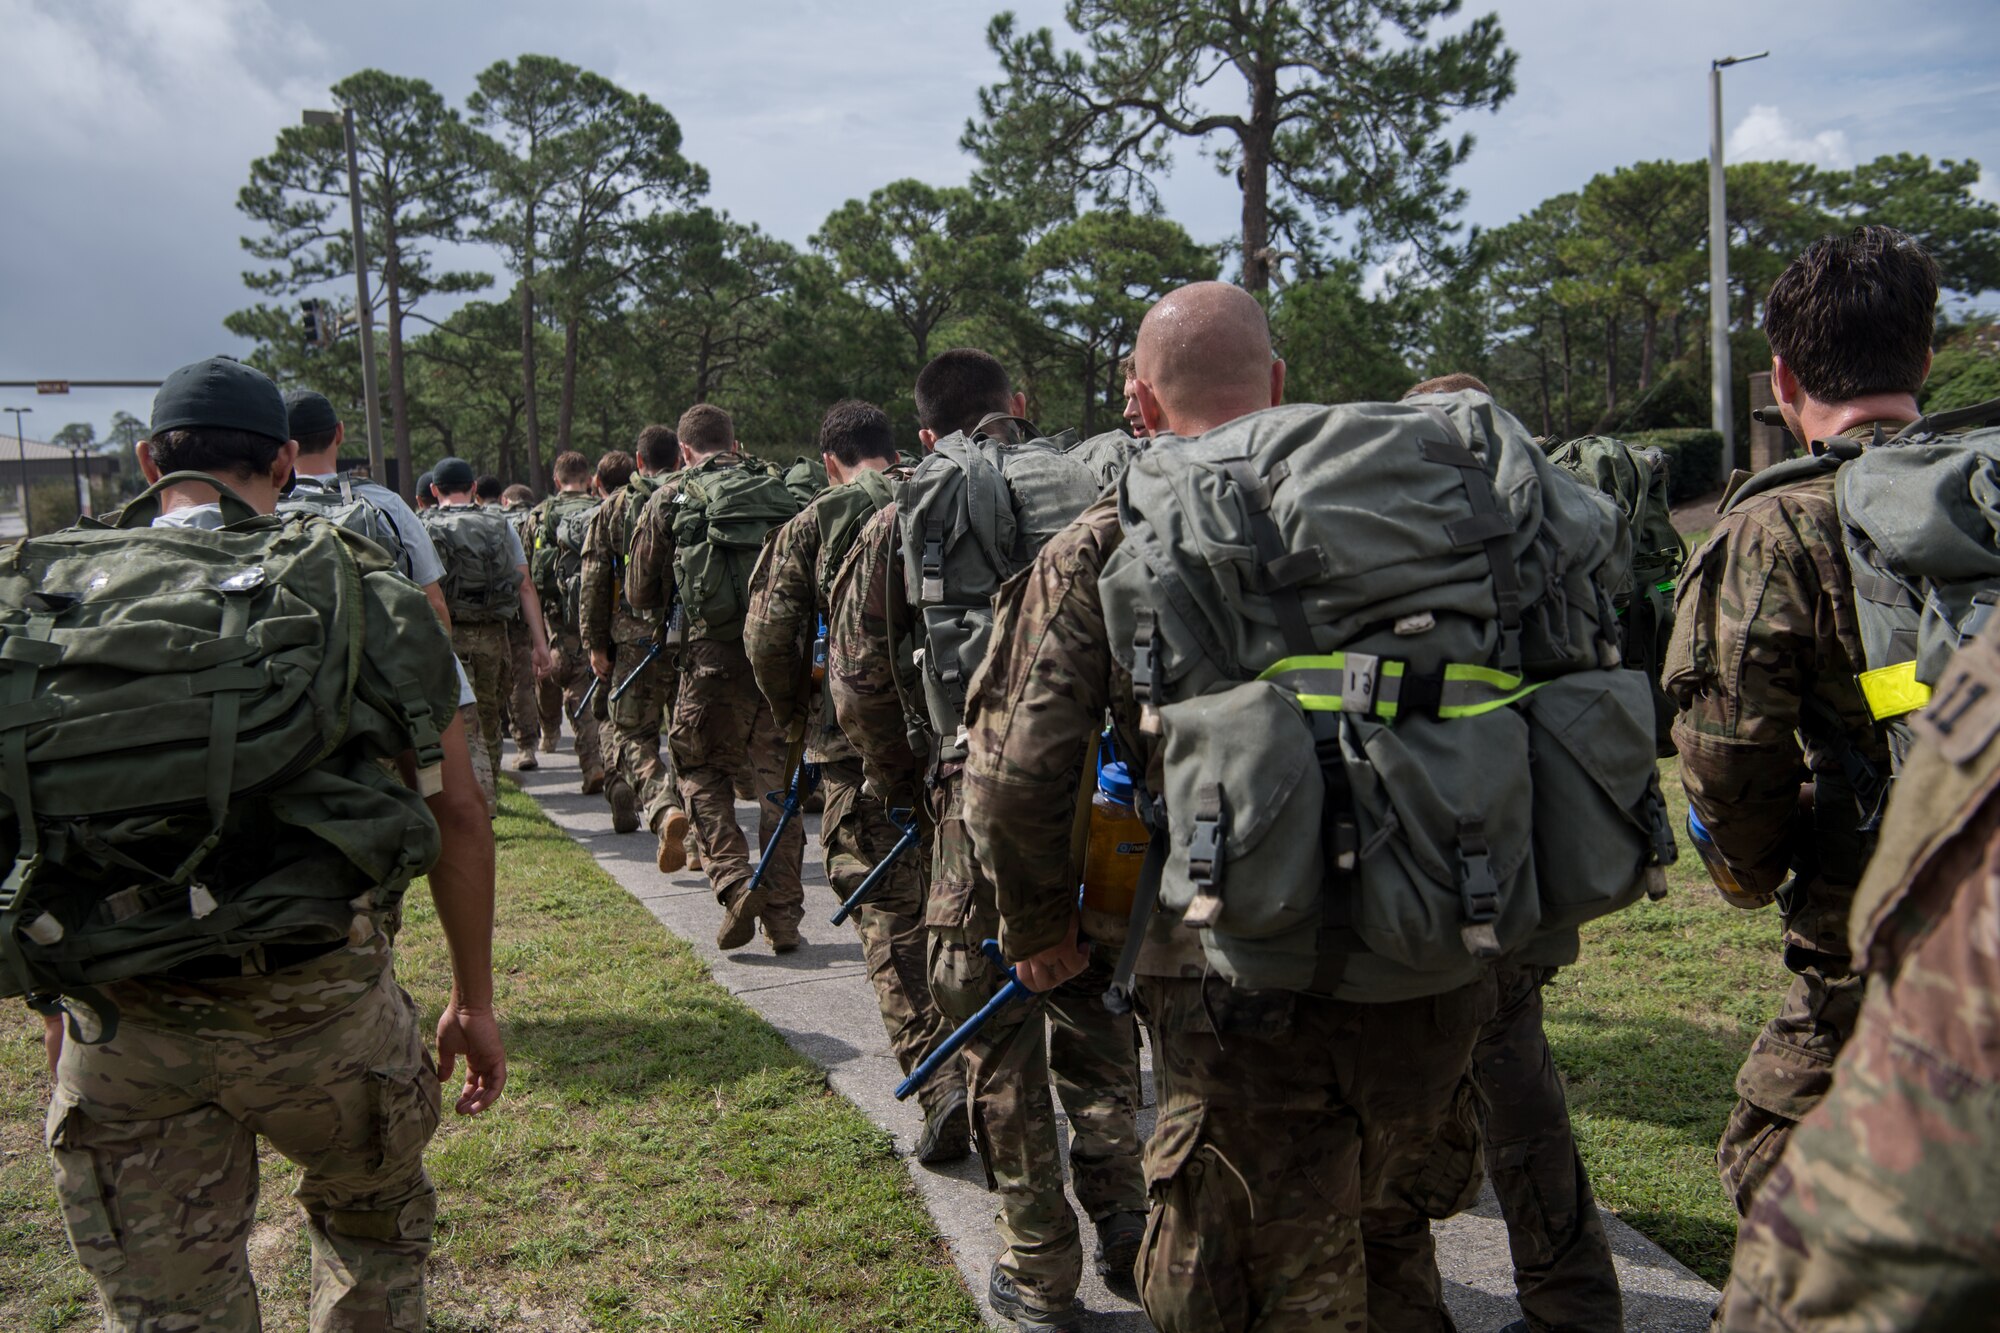 Special Tactics tactical air control party candidates and cadre walk along side-by-side carrying heavy ruck sacks, forming several lines stretching into the distance.